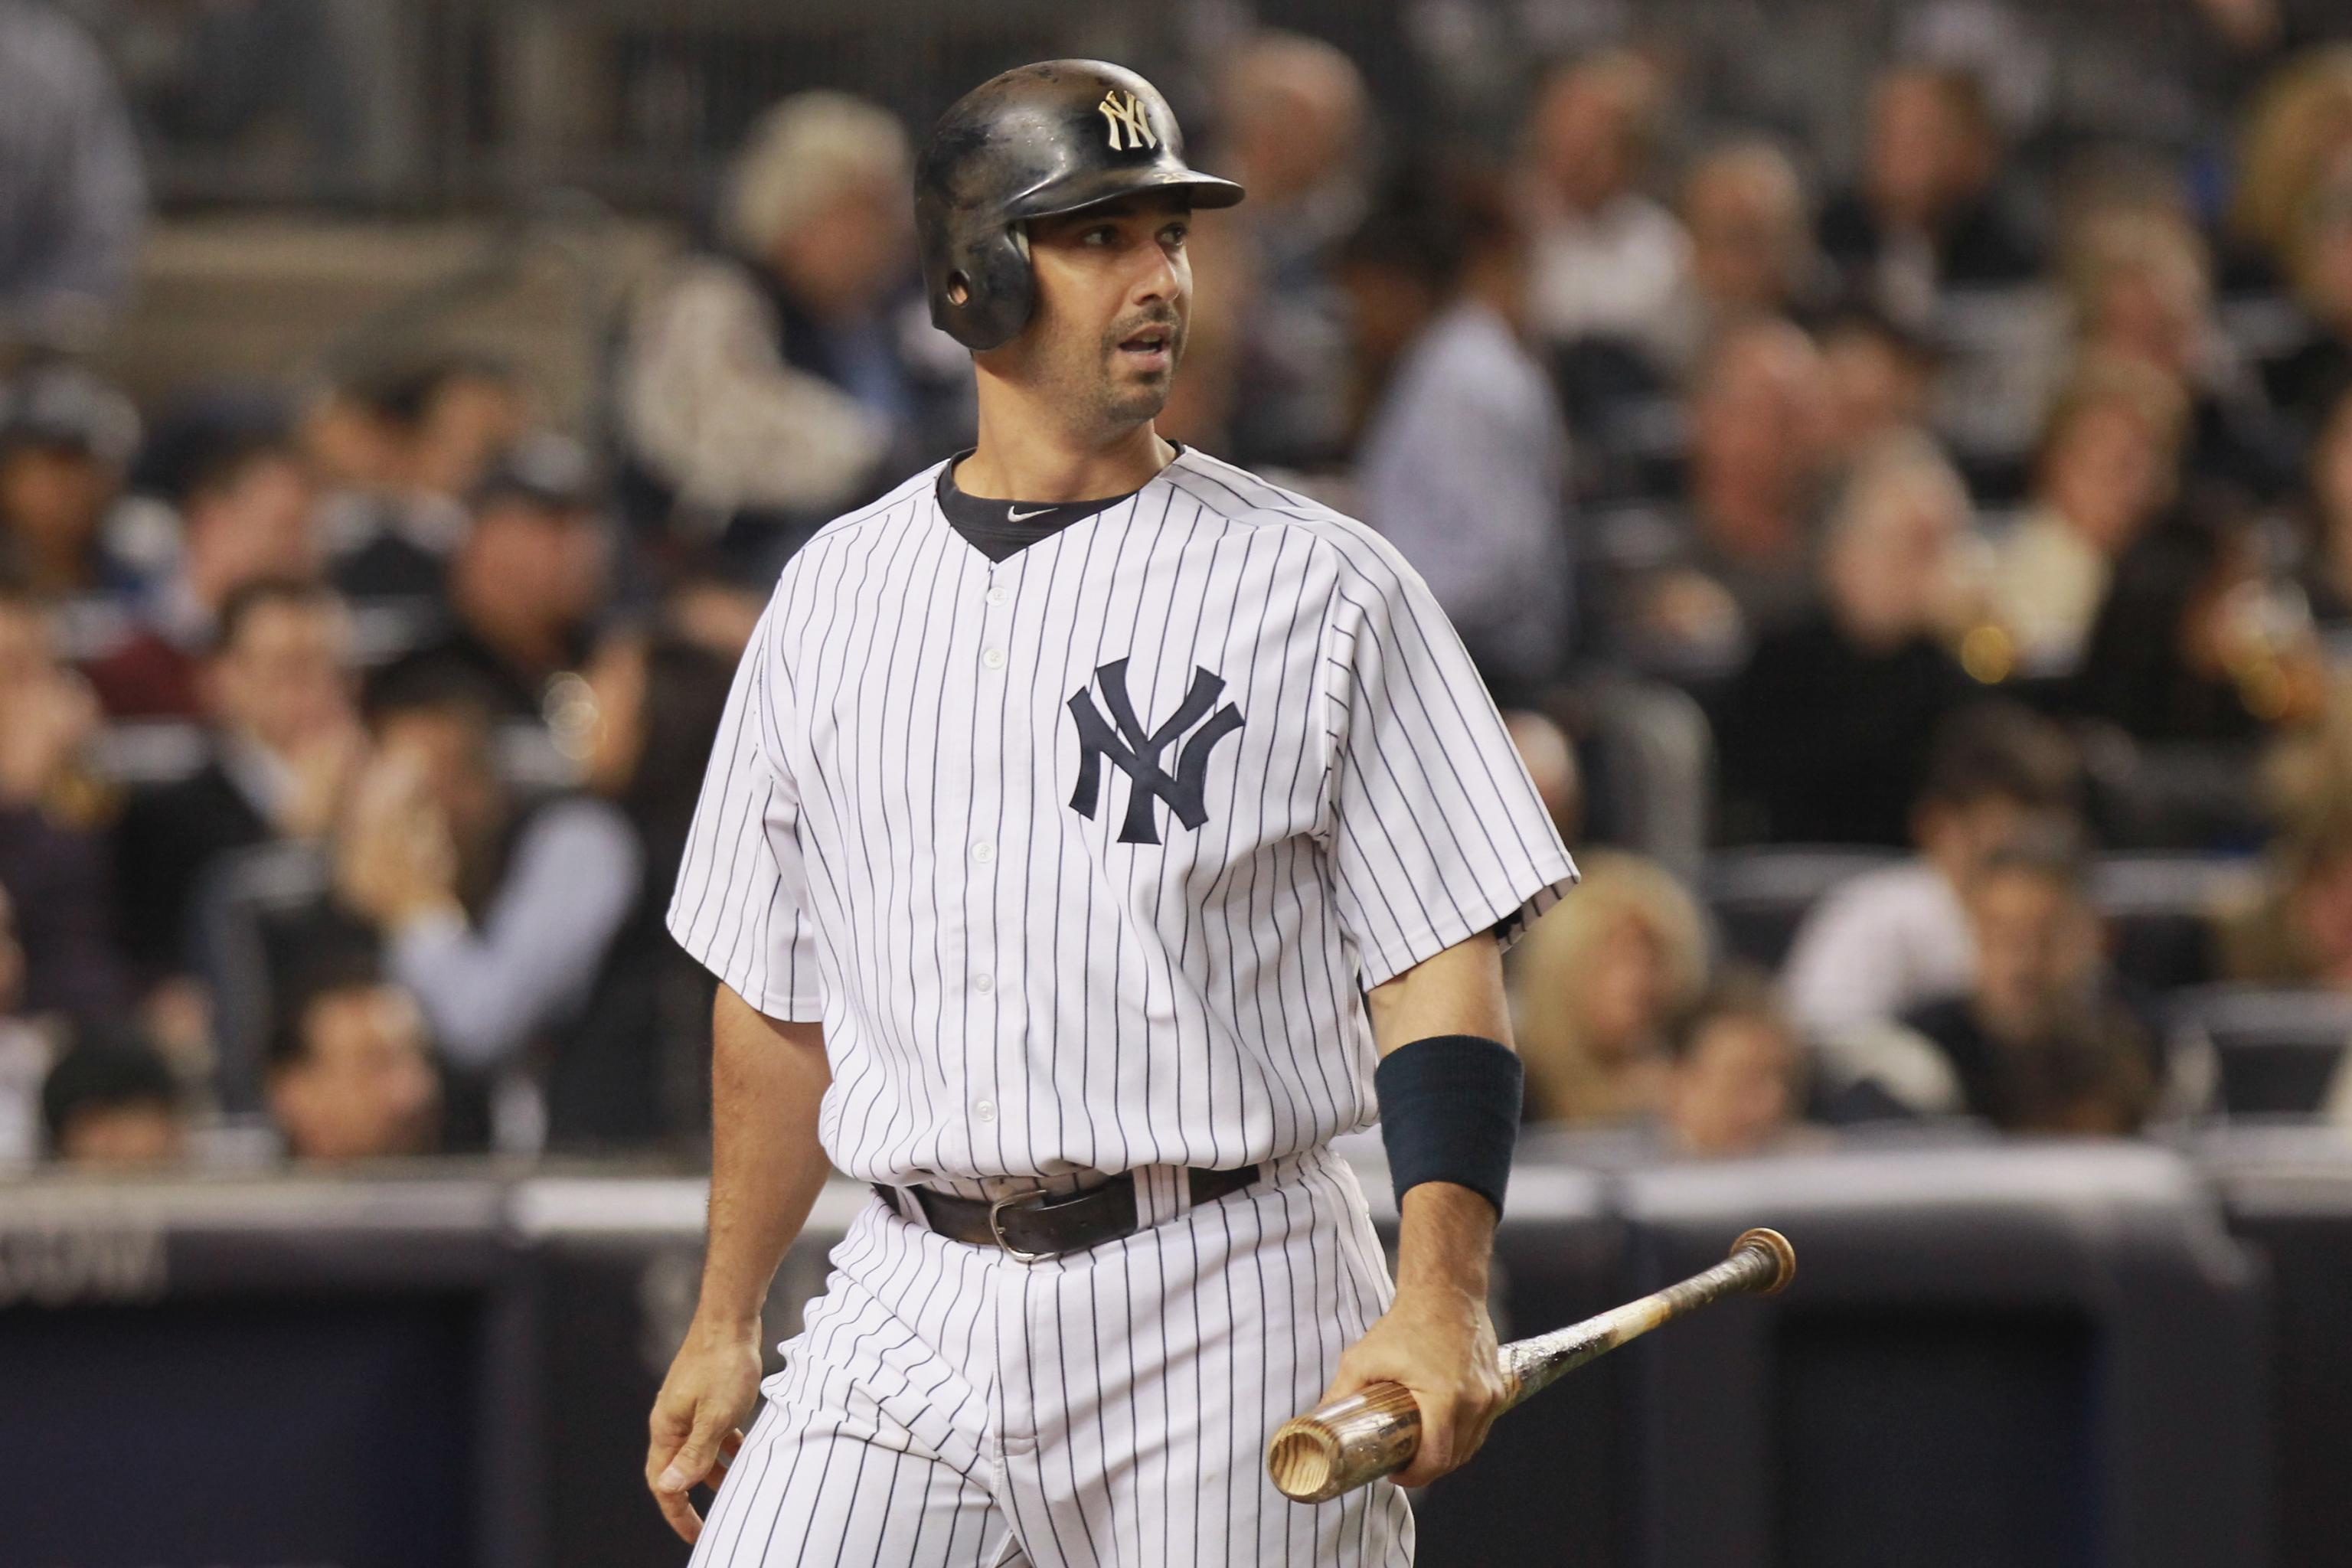 Yankees catcher Jorge Posada adds to legacy on field with